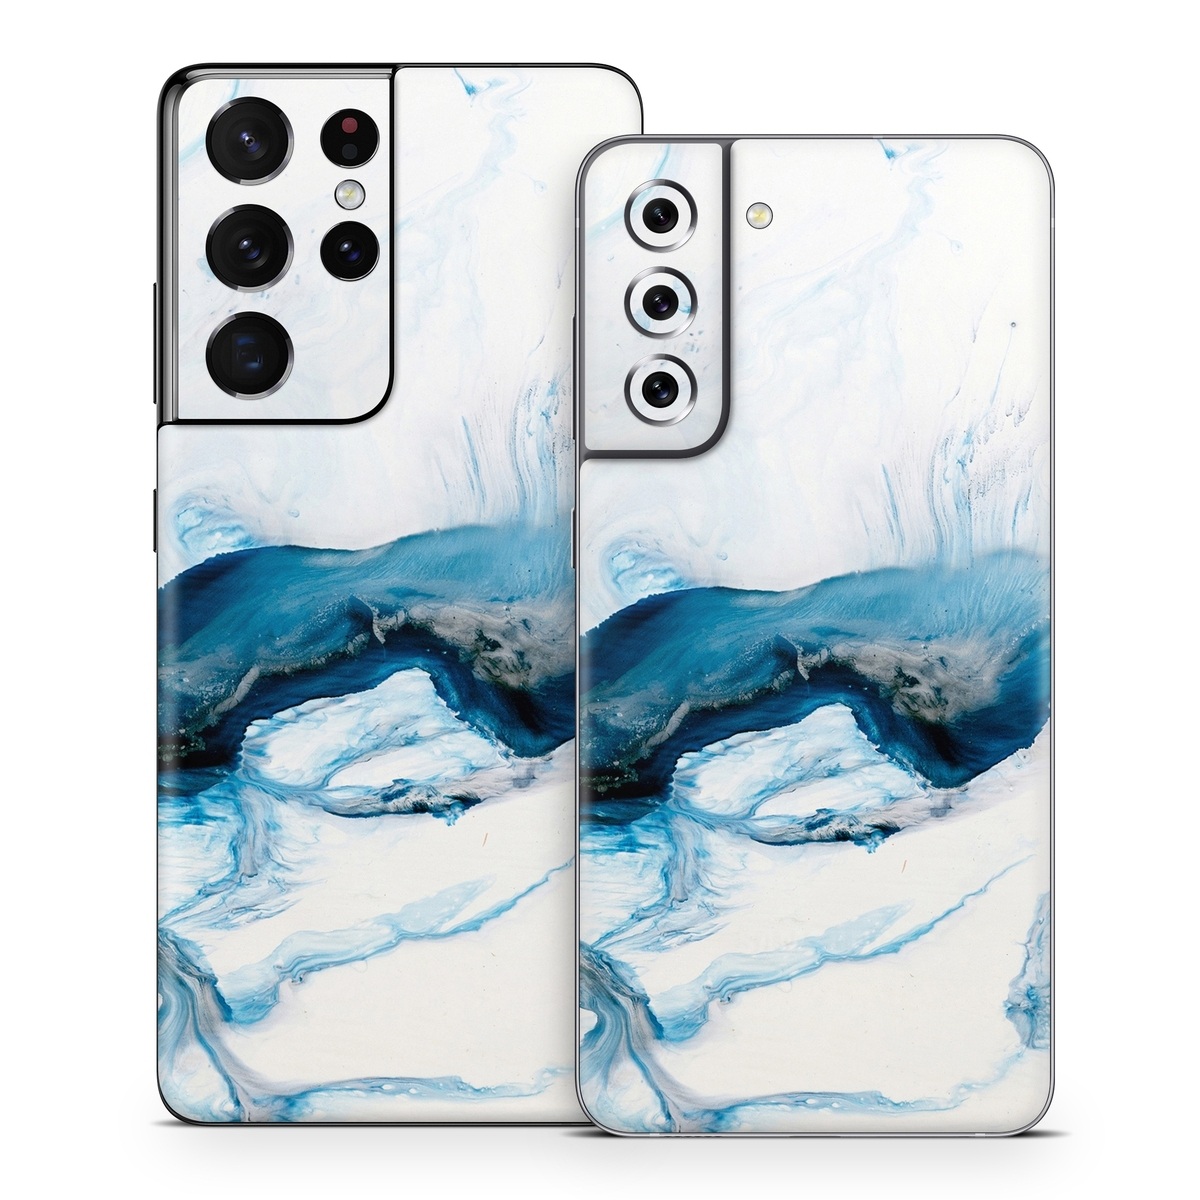 Samsung Galaxy S21 Skin design of Glacial landform, Blue, Water, Glacier, Sky, Arctic, Ice cap, Watercolor paint, Drawing, Art with white, blue, black colors